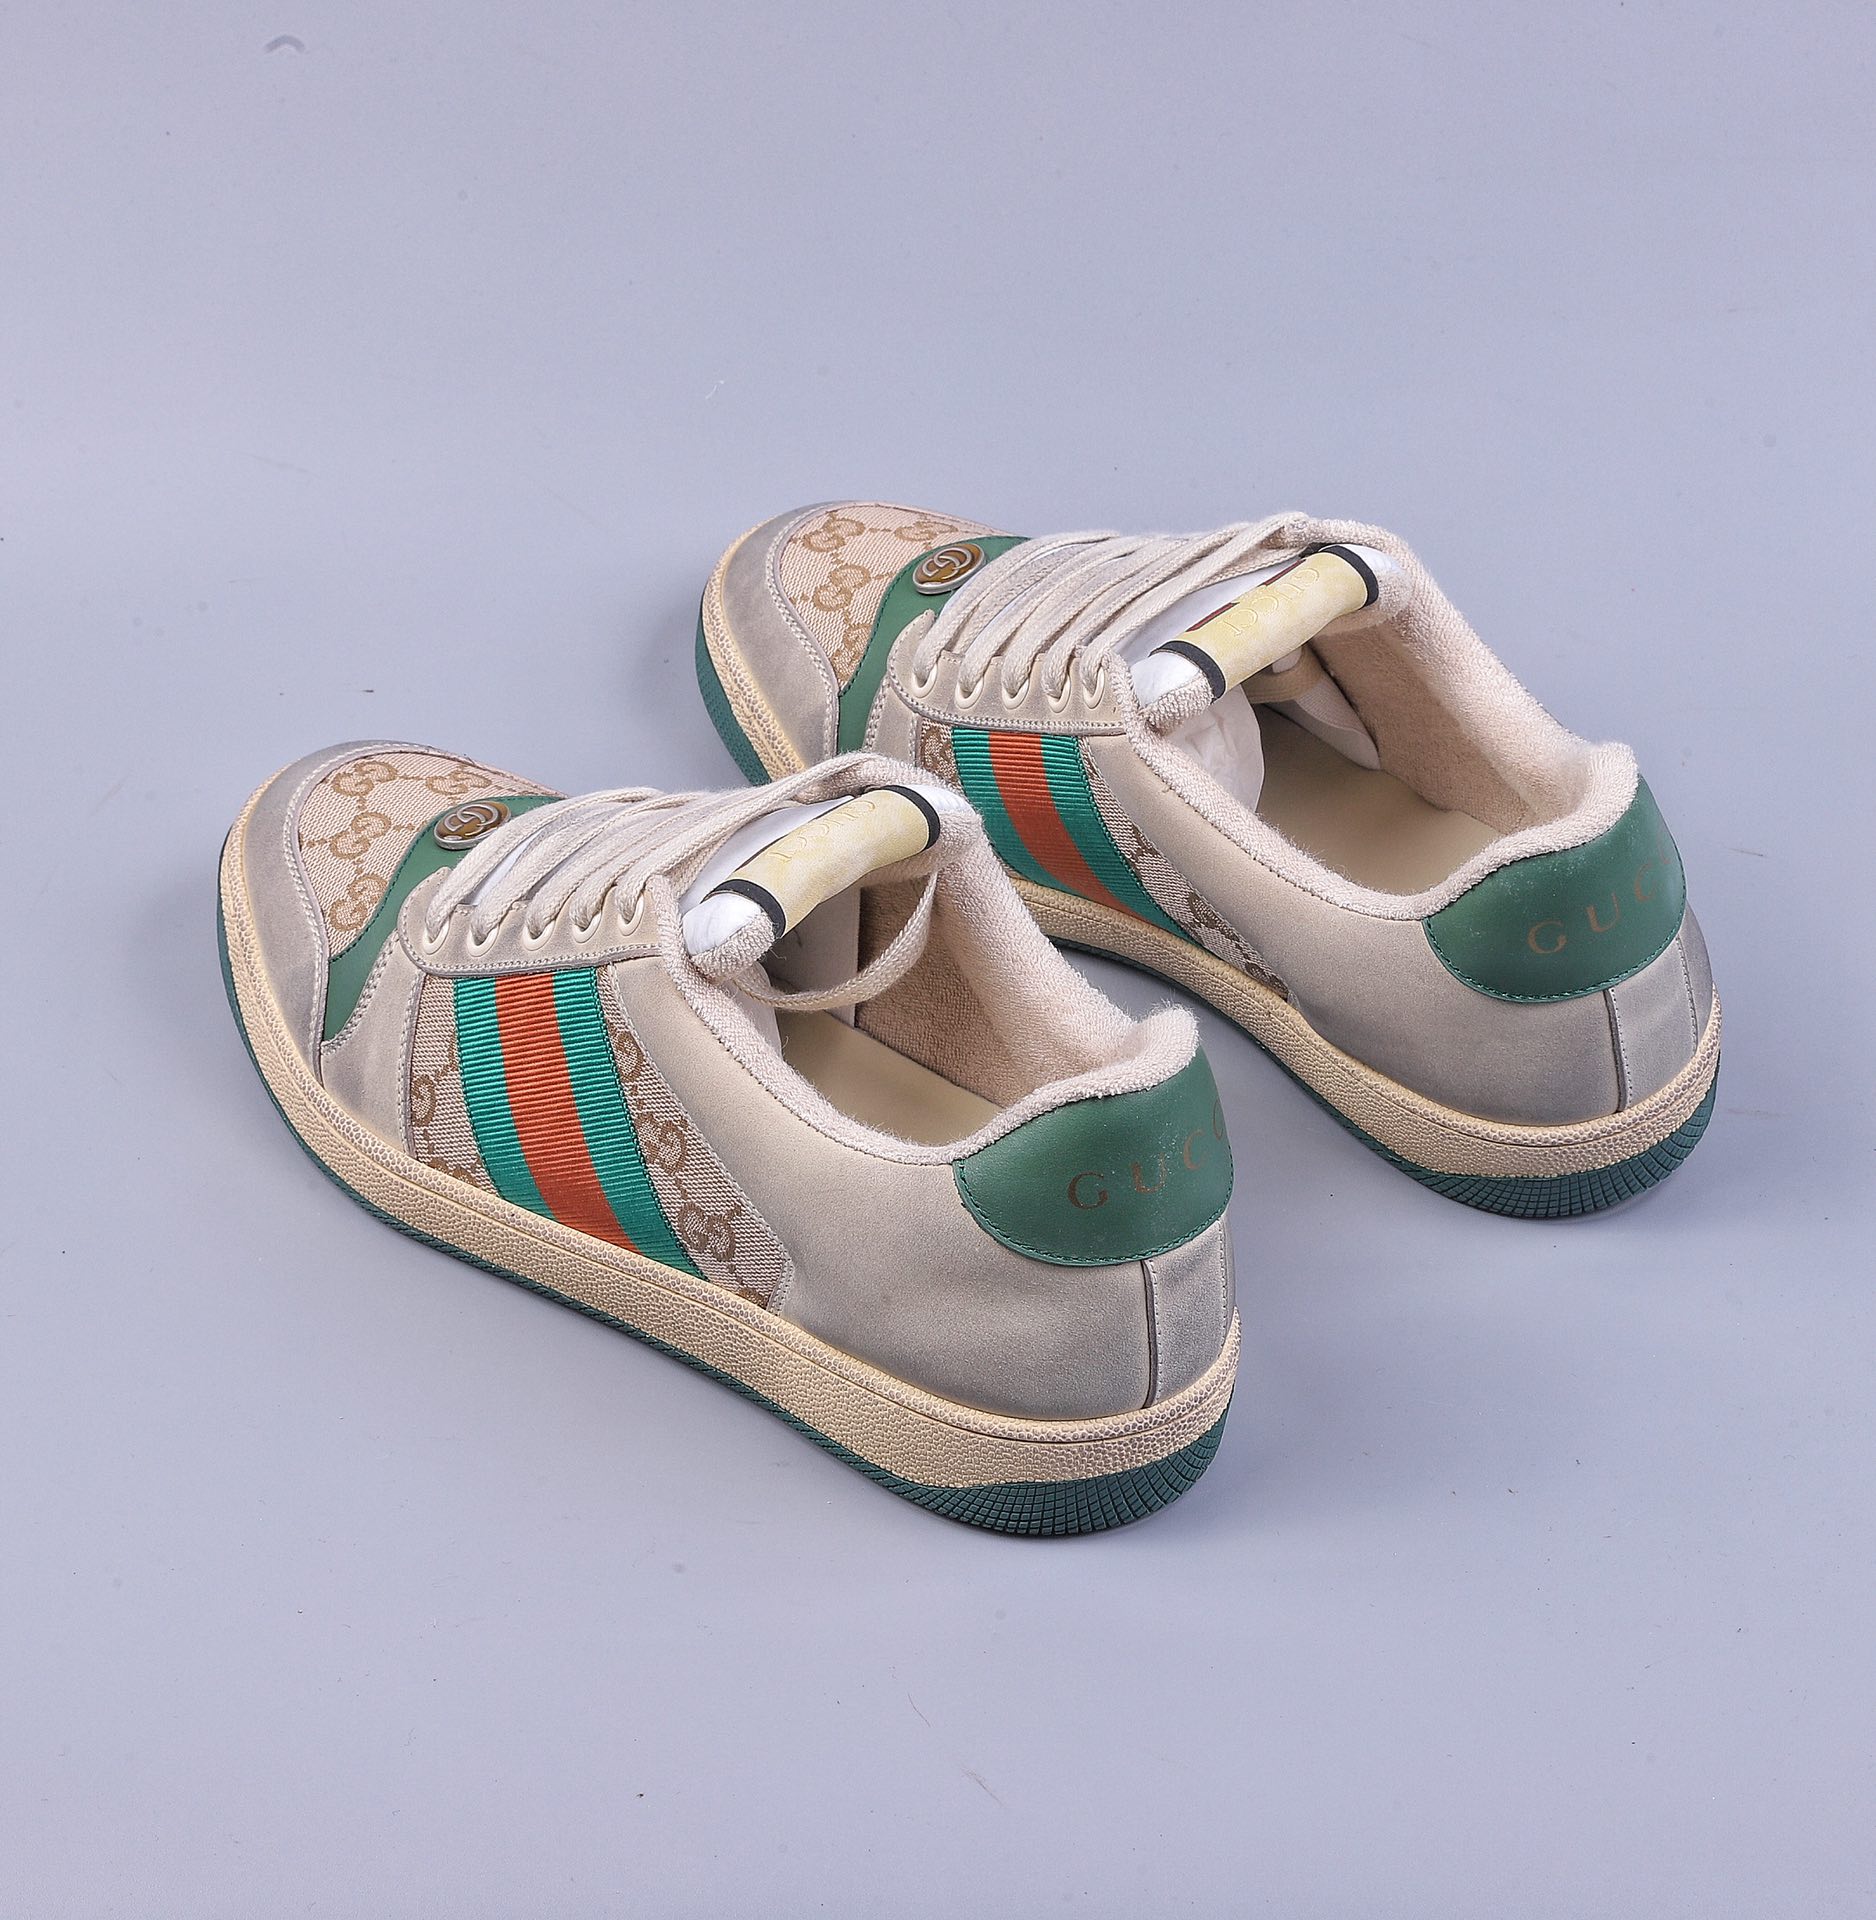 Guangdong version of Gucci series Gucci/GUCCI YY Gucci dirty shoes sneakers Gucci bee